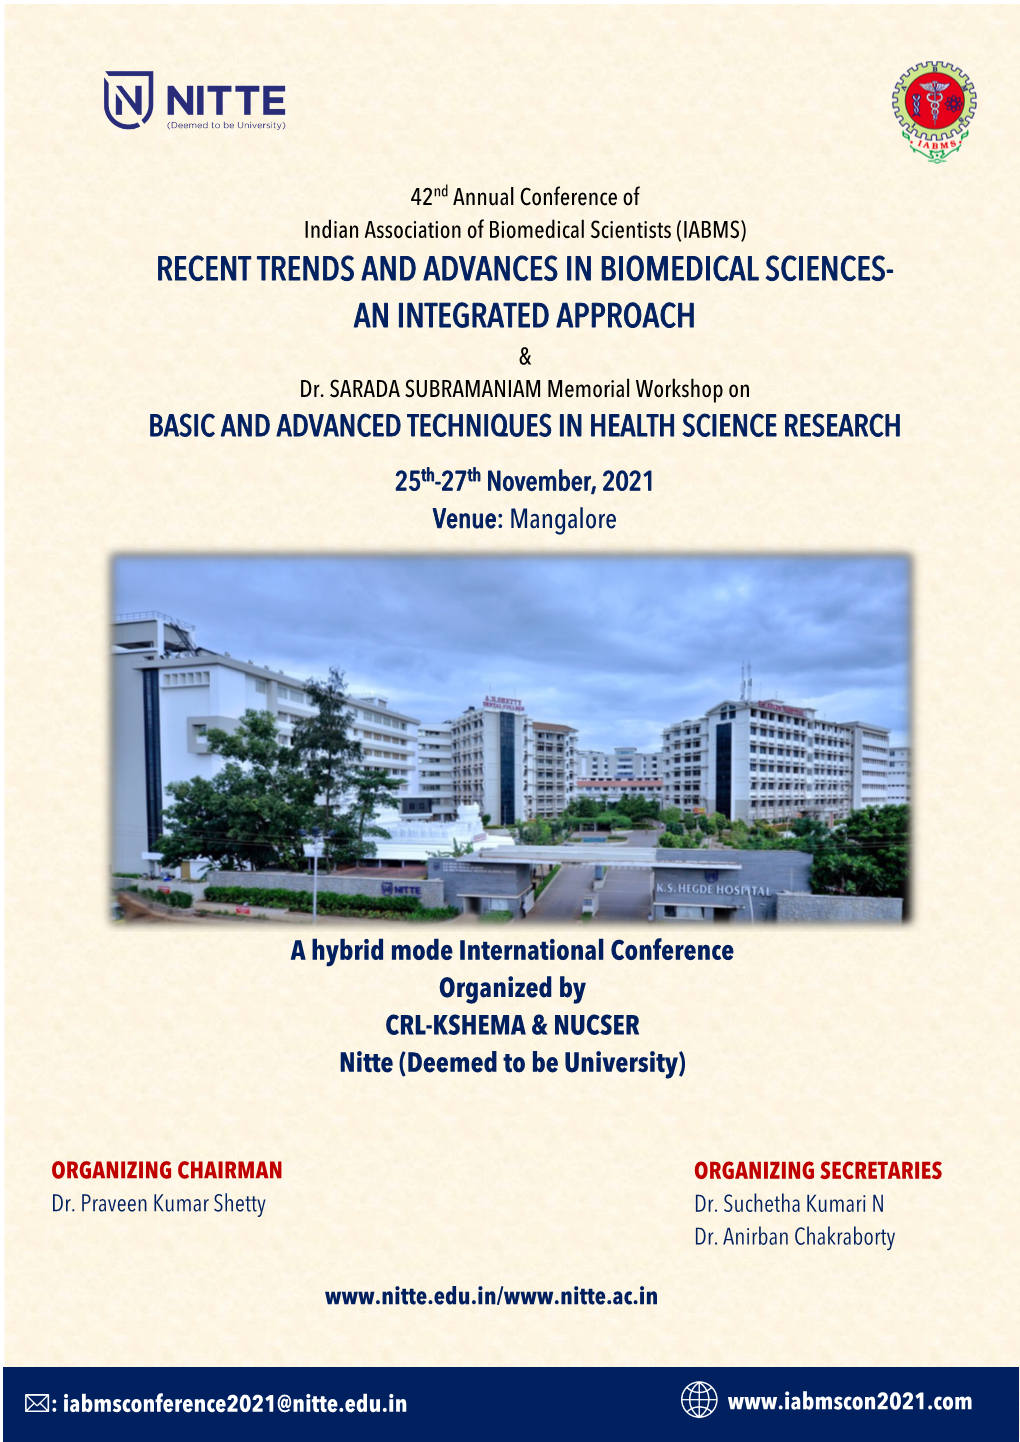 Recent Trends and Advances in Biomedical Sciences- an Integrated Approach